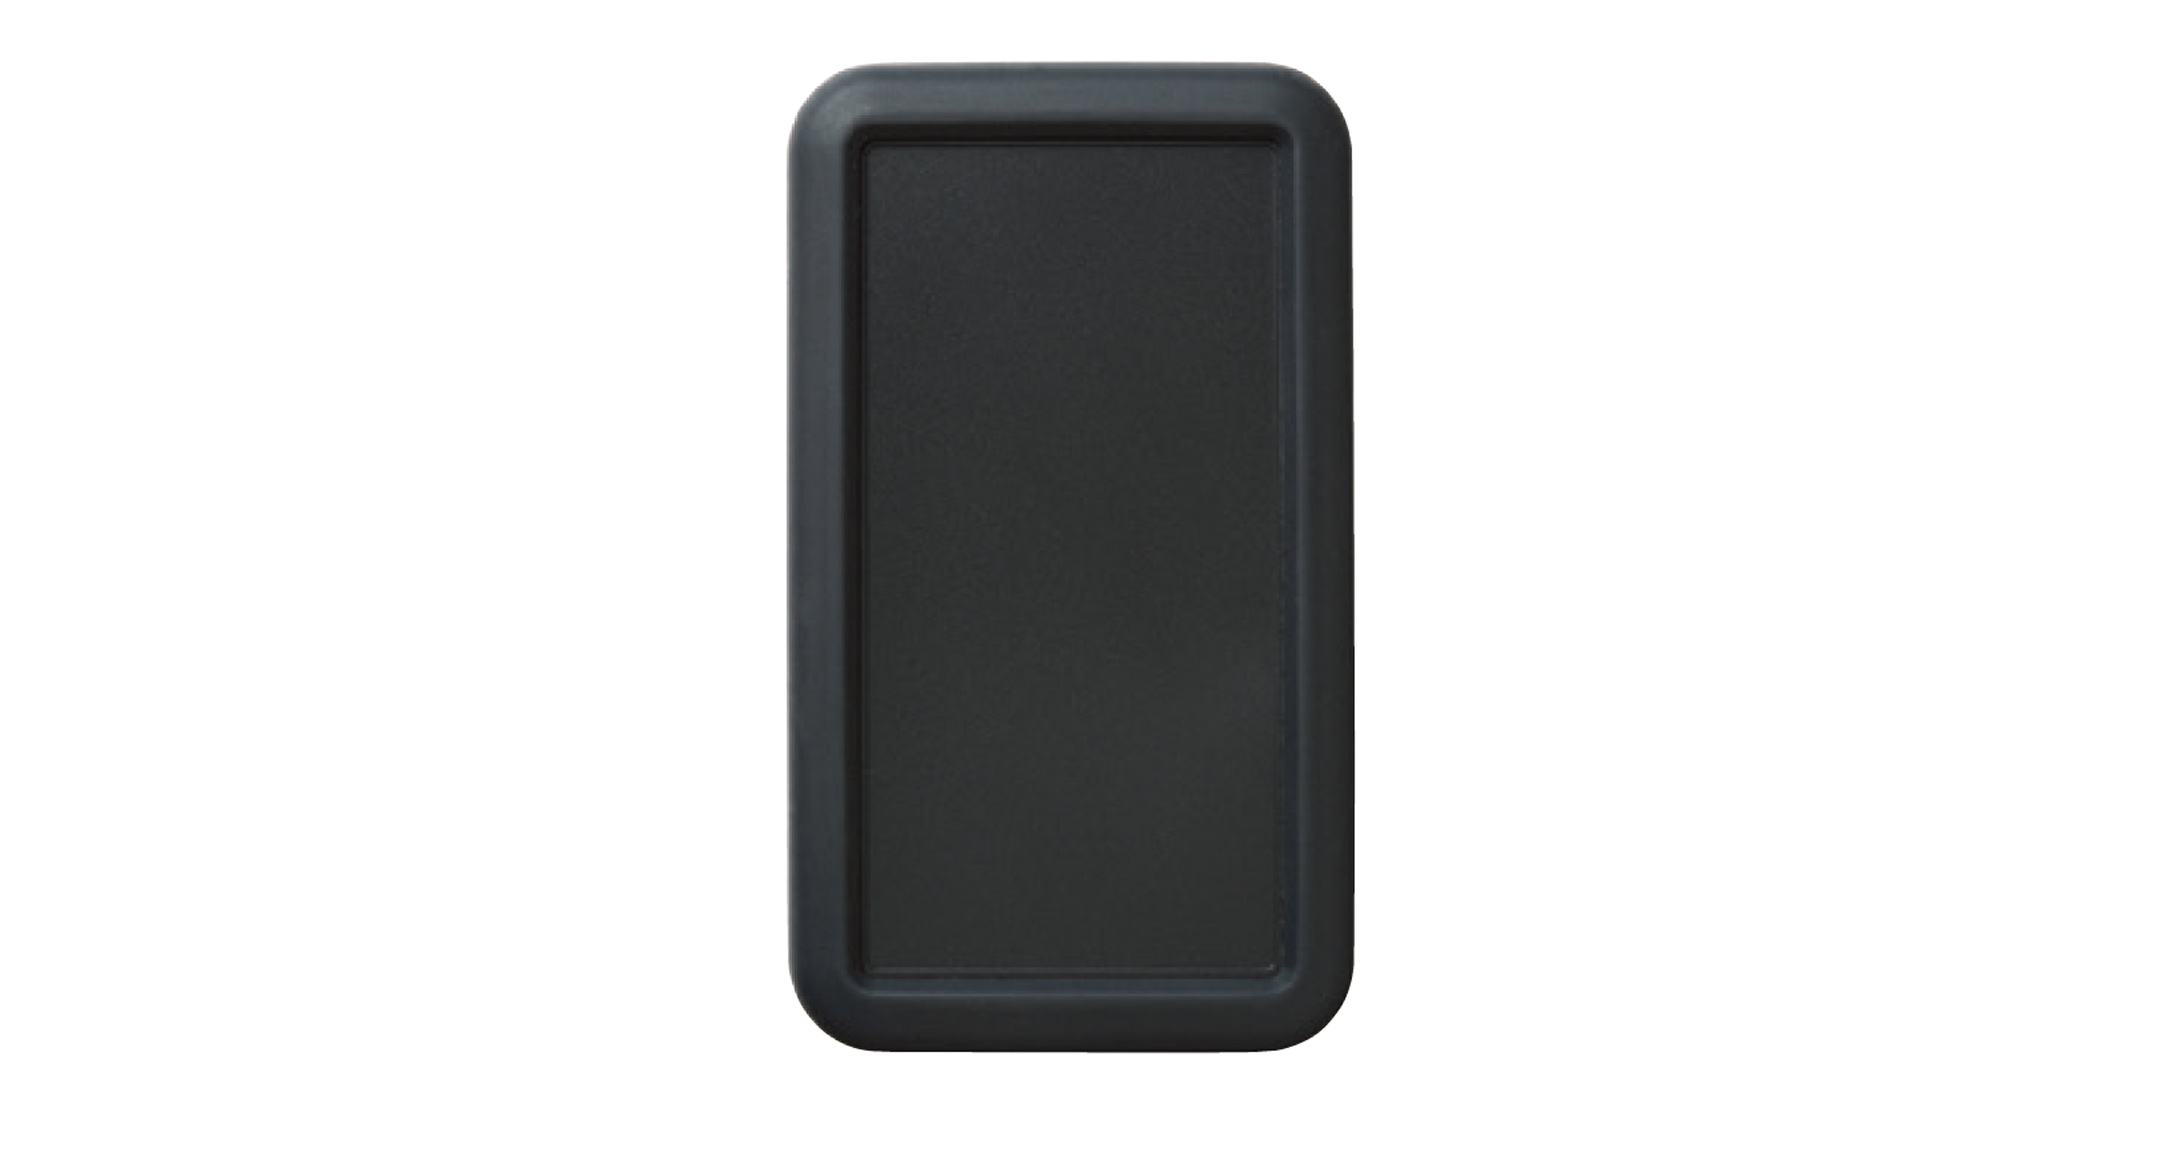 HANDHELD CASE with SILICONE COVER - LCS series:Dark gray/Dark gray